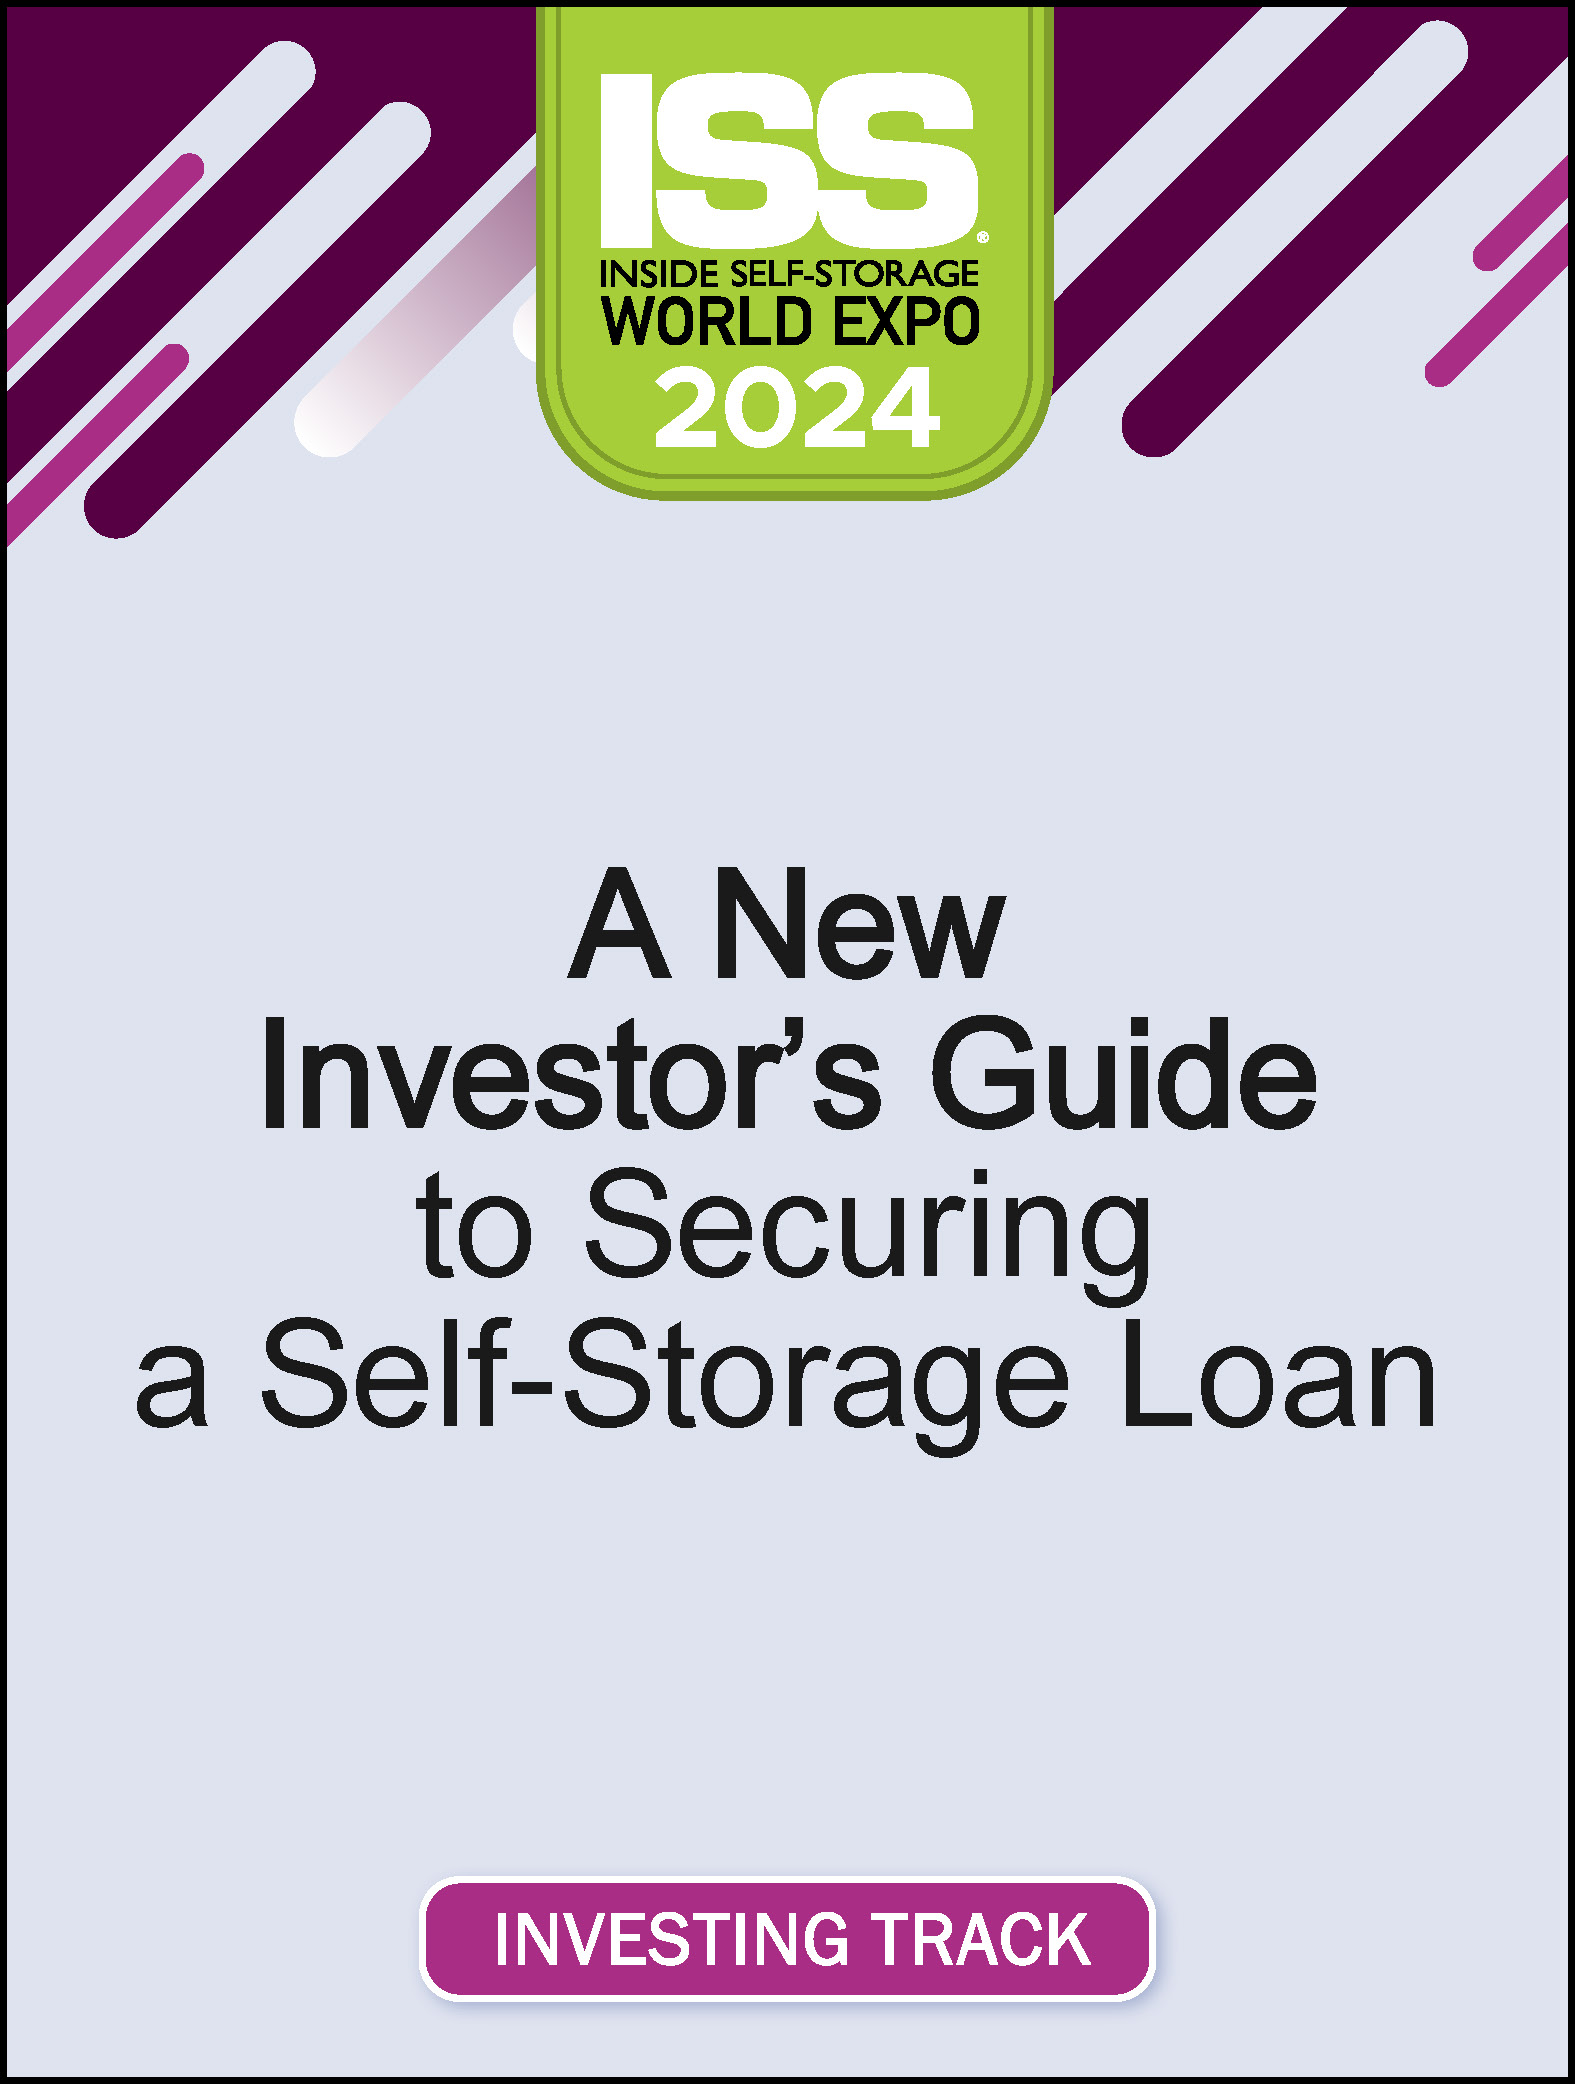 Video Pre-Order - A New Investor’s Guide to Securing a Self-Storage Loan